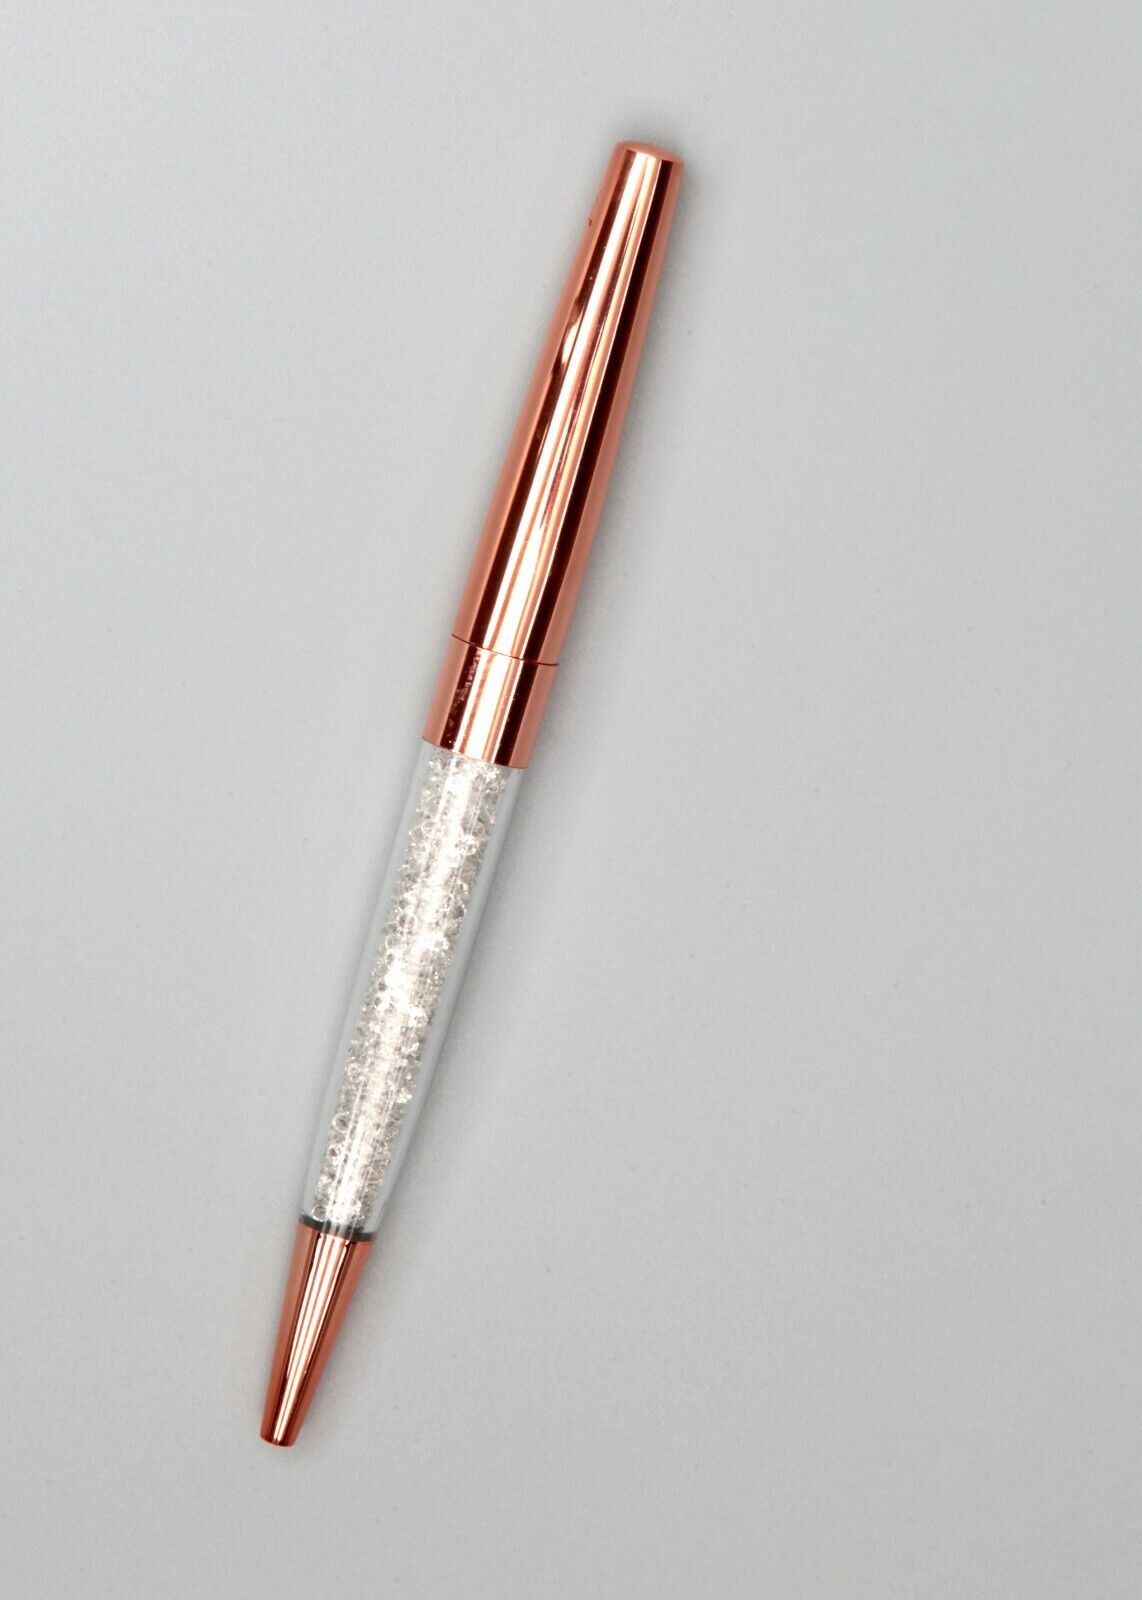 New Ballpoint Rose Gold with crystals Black Ink Pen Black ink Writing pen